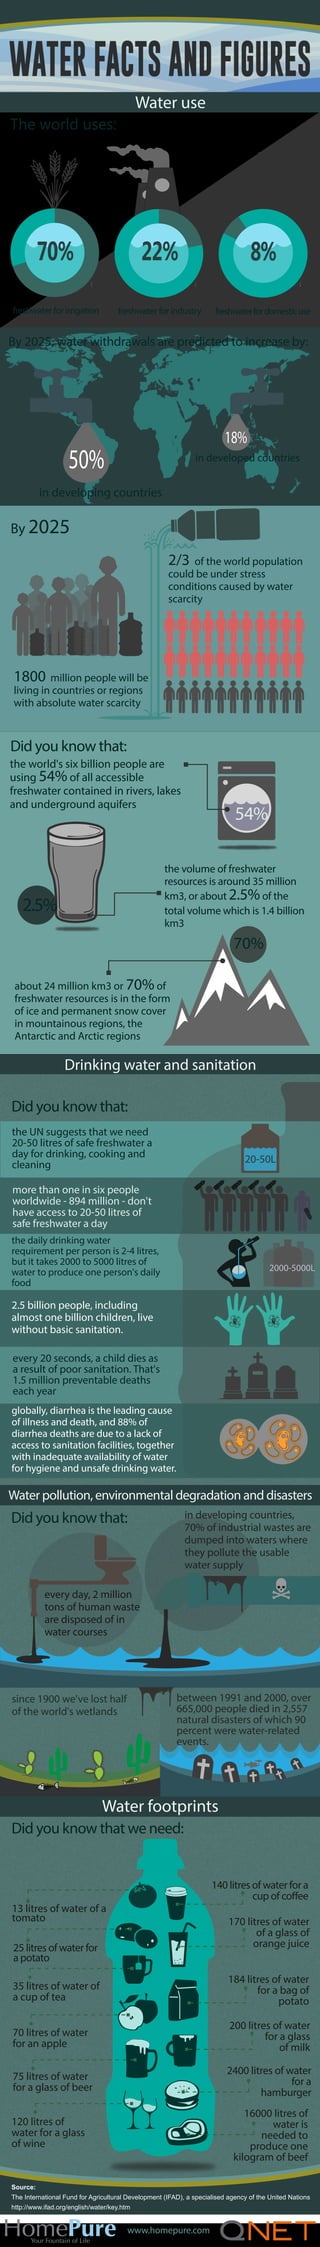 WATER FACTS AND FIGURES
Water use
The world uses:

70%

22%

8%

freshwater for irrigation

freshwater for industry

freshwater for domestic use

By 2025, water withdrawals are predicted to increase by:

18%

50%

in developed countries

in developing countries

By 2025

2/3

of the world population
could be under stress
conditions caused by water
scarcity

1800 million people will be
living in countries or regions
with absolute water scarcity

Did you know that:
the world's six billion people are
using 54% of all accessible
freshwater contained in rivers, lakes
and underground aquifers

54%

the volume of freshwater
resources is around 35 million
km3, or about 2.5% of the
total volume which is 1.4 billion
km3

2.5%

70%
about 24 million km3 or 70% of
freshwater resources is in the form
of ice and permanent snow cover
in mountainous regions, the
Antarctic and Arctic regions

Drinking water and sanitation
Did you know that:
the UN suggests that we need
20-50 litres of safe freshwater a
day for drinking, cooking and
cleaning

20-50L

more than one in six people
worldwide - 894 million - don't
have access to 20-50 litres of
safe freshwater a day
the daily drinking water
requirement per person is 2-4 litres,
but it takes 2000 to 5000 litres of
water to produce one person's daily
food

2000-5000L

2.5 billion people, including
almost one billion children, live
without basic sanitation.
every 20 seconds, a child dies as
a result of poor sanitation. That's
1.5 million preventable deaths
each year
globally, diarrhea is the leading cause
of illness and death, and 88% of
diarrhea deaths are due to a lack of
access to sanitation facilities, together
with inadequate availability of water
for hygiene and unsafe drinking water.

Water pollution, environmental degradation and disasters

Did you know that:

in developing countries,
70% of industrial wastes are
dumped into waters where
they pollute the usable
water supply

every day, 2 million
tons of human waste
are disposed of in
water courses

between 1991 and 2000, over
665,000 people died in 2,557
natural disasters of which 90
percent were water-related
events.

since 1900 we've lost half
of the world's wetlands

Water footprints
Did you know that we need:

140 litres of water for a
cup of coffee

13 litres of water of a
tomato

170 litres of water
of a glass of
orange juice

25 litres of water for
a potato
35 litres of water of
a cup of tea

184 litres of water
for a bag of
potato

70 litres of water
for an apple

200 litres of water
for a glass
of milk

75 litres of water
for a glass of beer

2400 litres of water
for a
hamburger
16000 litres of
water is
needed to
produce one
kilogram of beef

120 litres of
water for a glass
of wine

Source:
The International Fund for Agricultural Development (IFAD), a specialised agency of the United Nations
http://www.ifad.org/english/water/key.htm

www.homepure.com

 